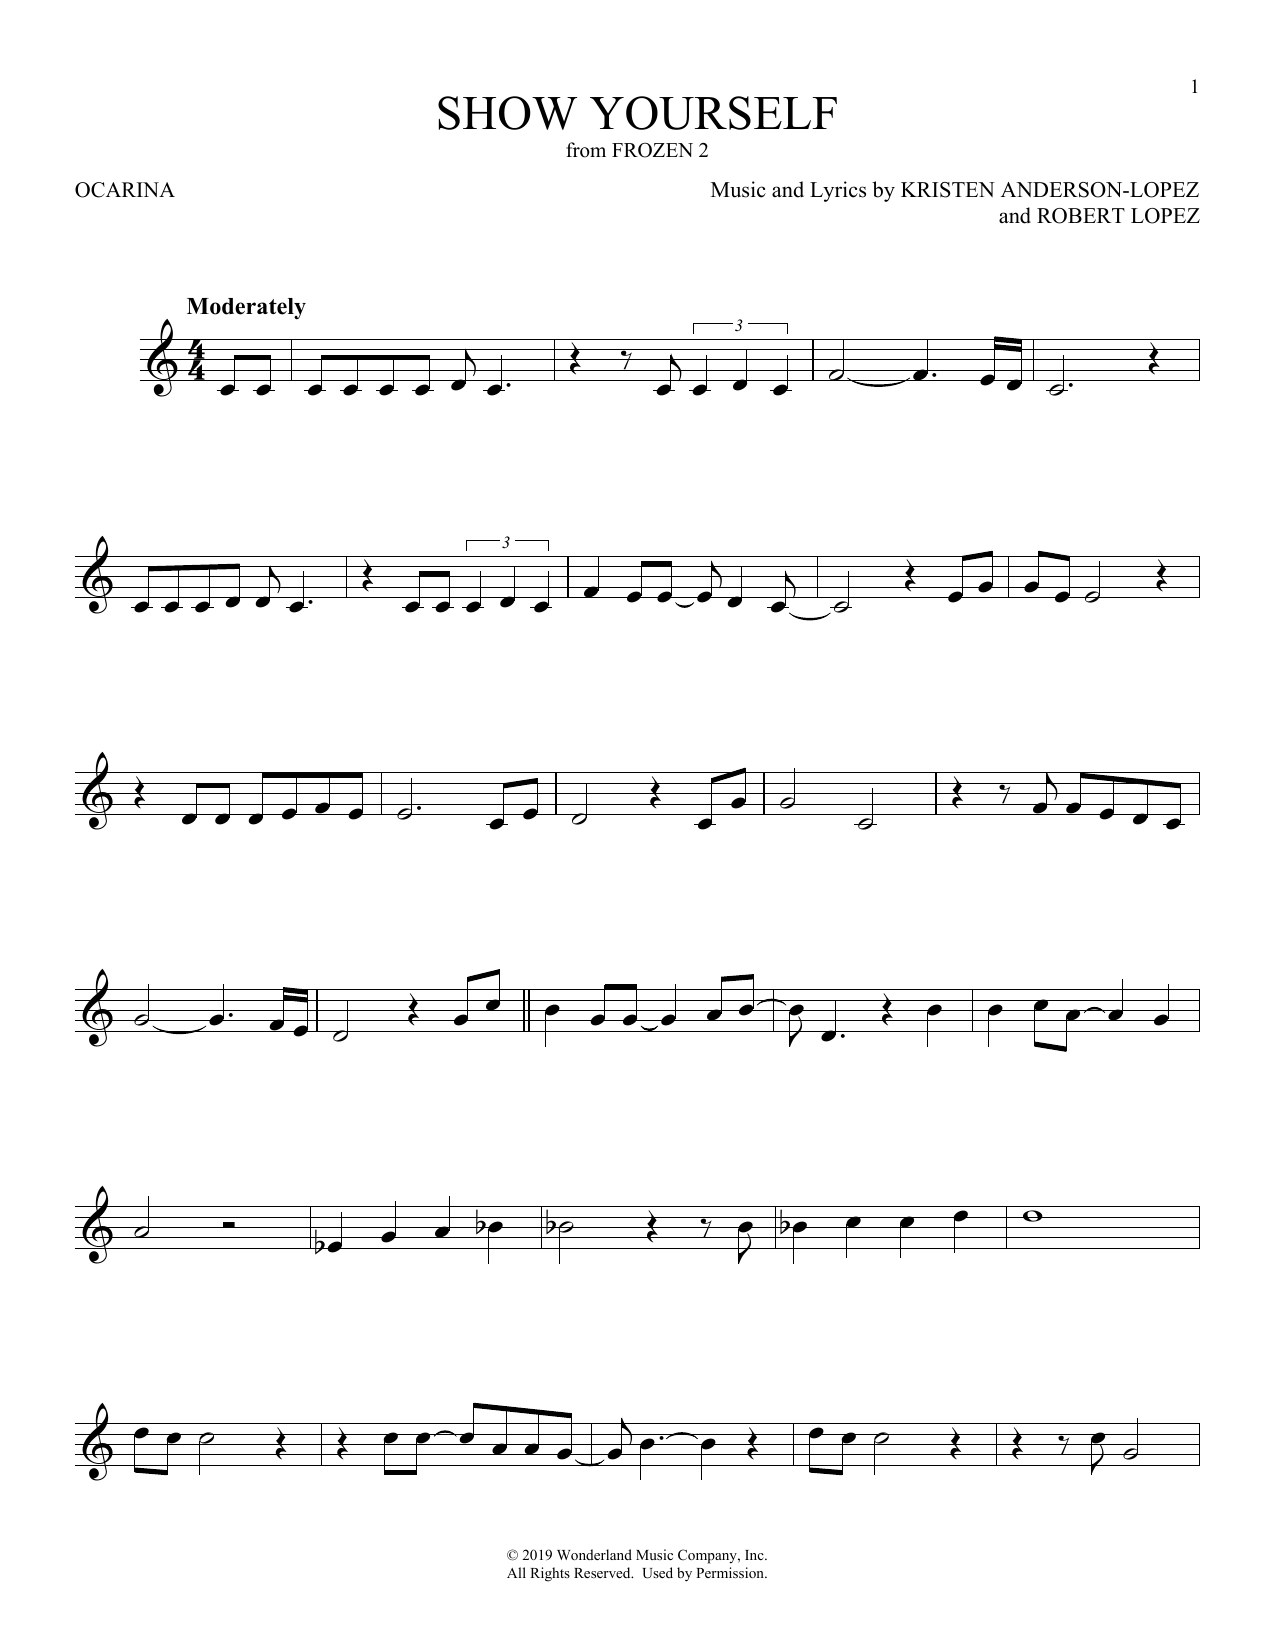 Download Kristen Anderson-Lopez & Robert Lope Show Yourself (from Frozen 2) Sheet Music